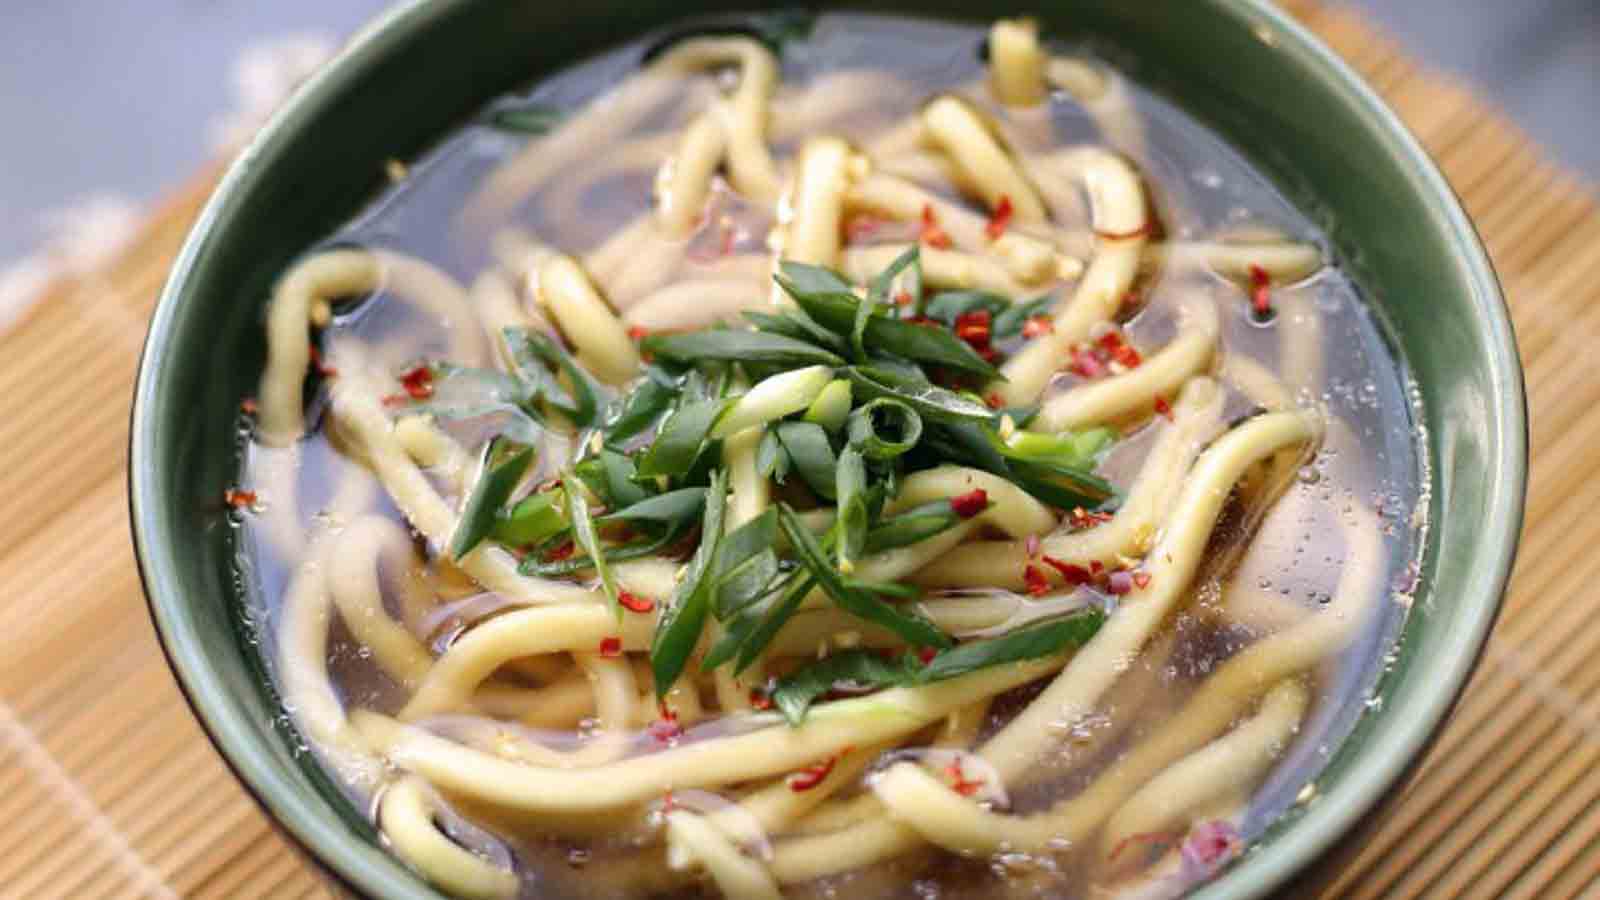 Udon is often served hot as a noodle soup in its simplest form, as kake udon, in a mildly flavoured broth called kakejiru, which is made of dashi, soy sauce, and mirin. It is usually topped with thinly chopped scallions. Other common toppings include tempura, often prawn or kakiage (a type of mixed tempura fritter), or aburaage, a type of deep-fried tofu pockets seasoned with sugar, mirin, and soy sauce. A thin slice of kamaboko, a halfmoon-shaped fish cake, is often added. Shichimi can be added to taste.Source: https://en.wikipedia.org/wiki/Udon